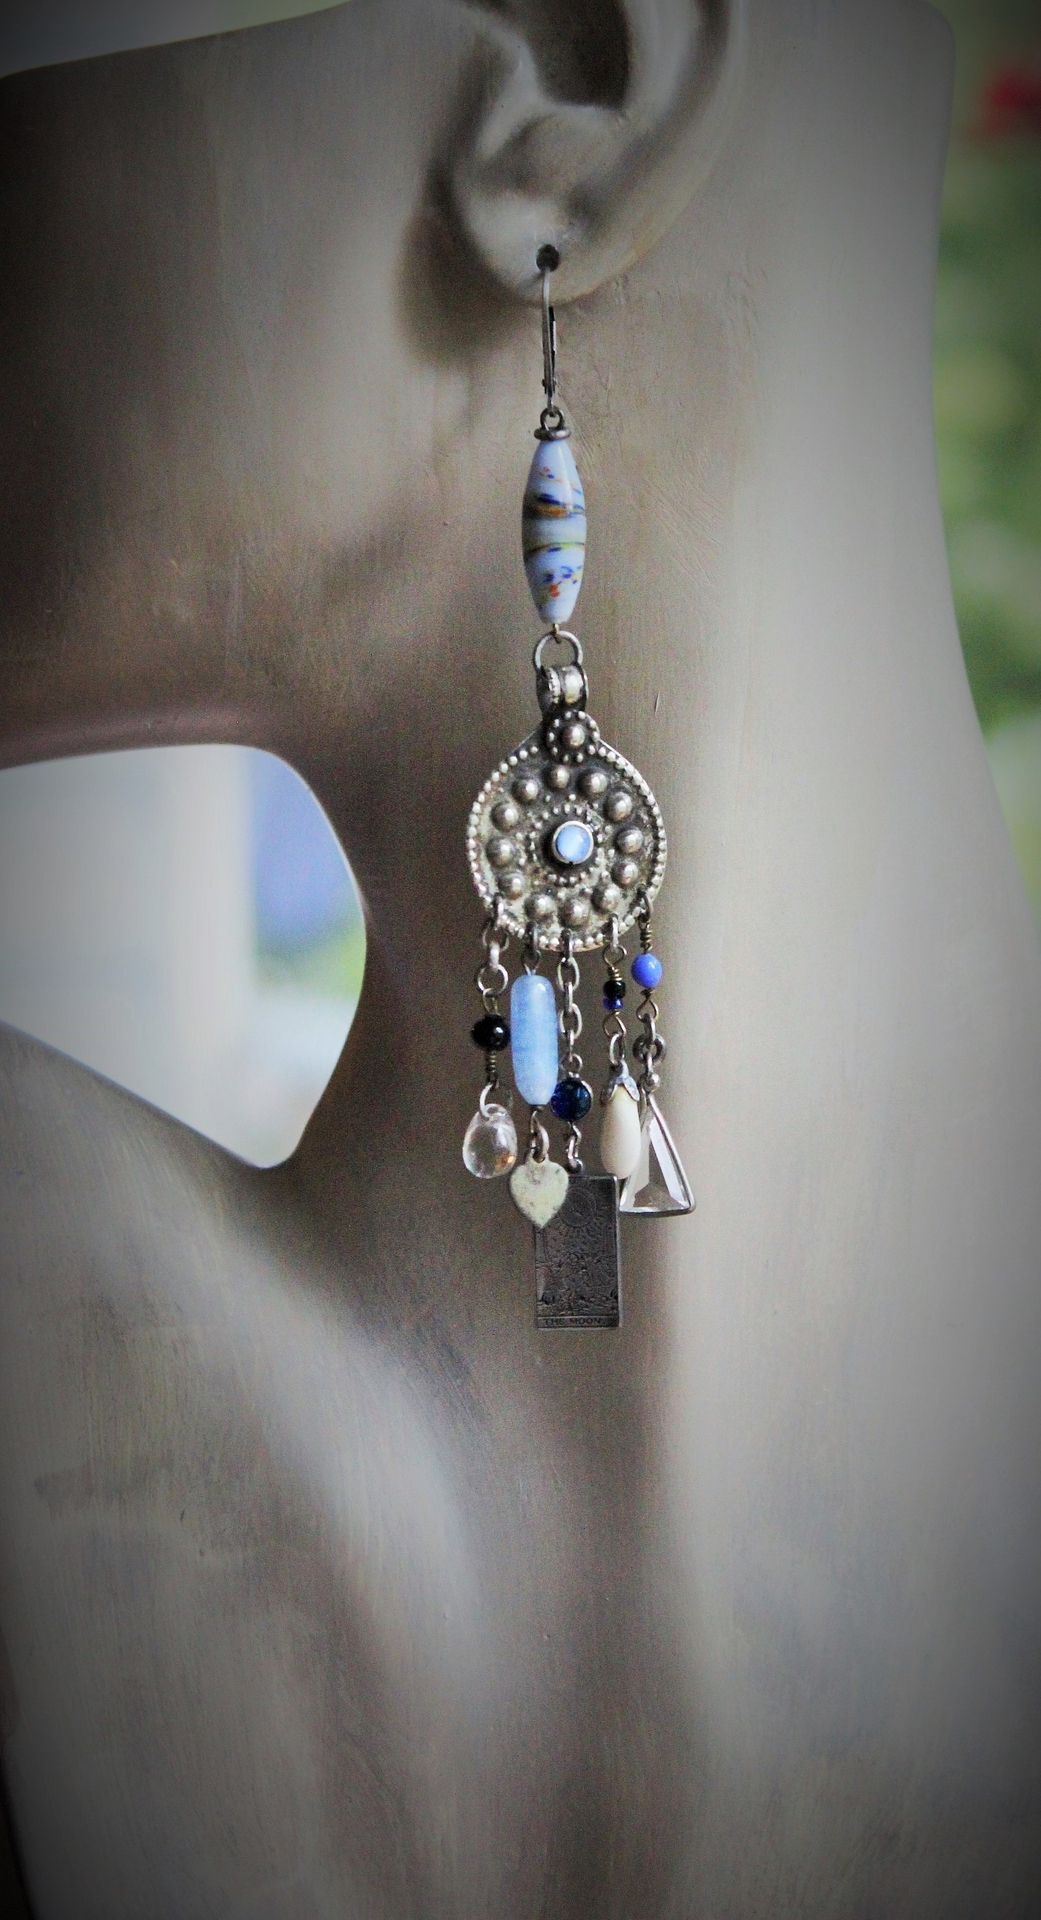 Asymmetrical Gypsy The Moon Earrings w/Antique Kuchi Gypsy Findings,Sterling The Sun Tarot Medal,Antique Hand Blown Mardi Gras Beads & More!